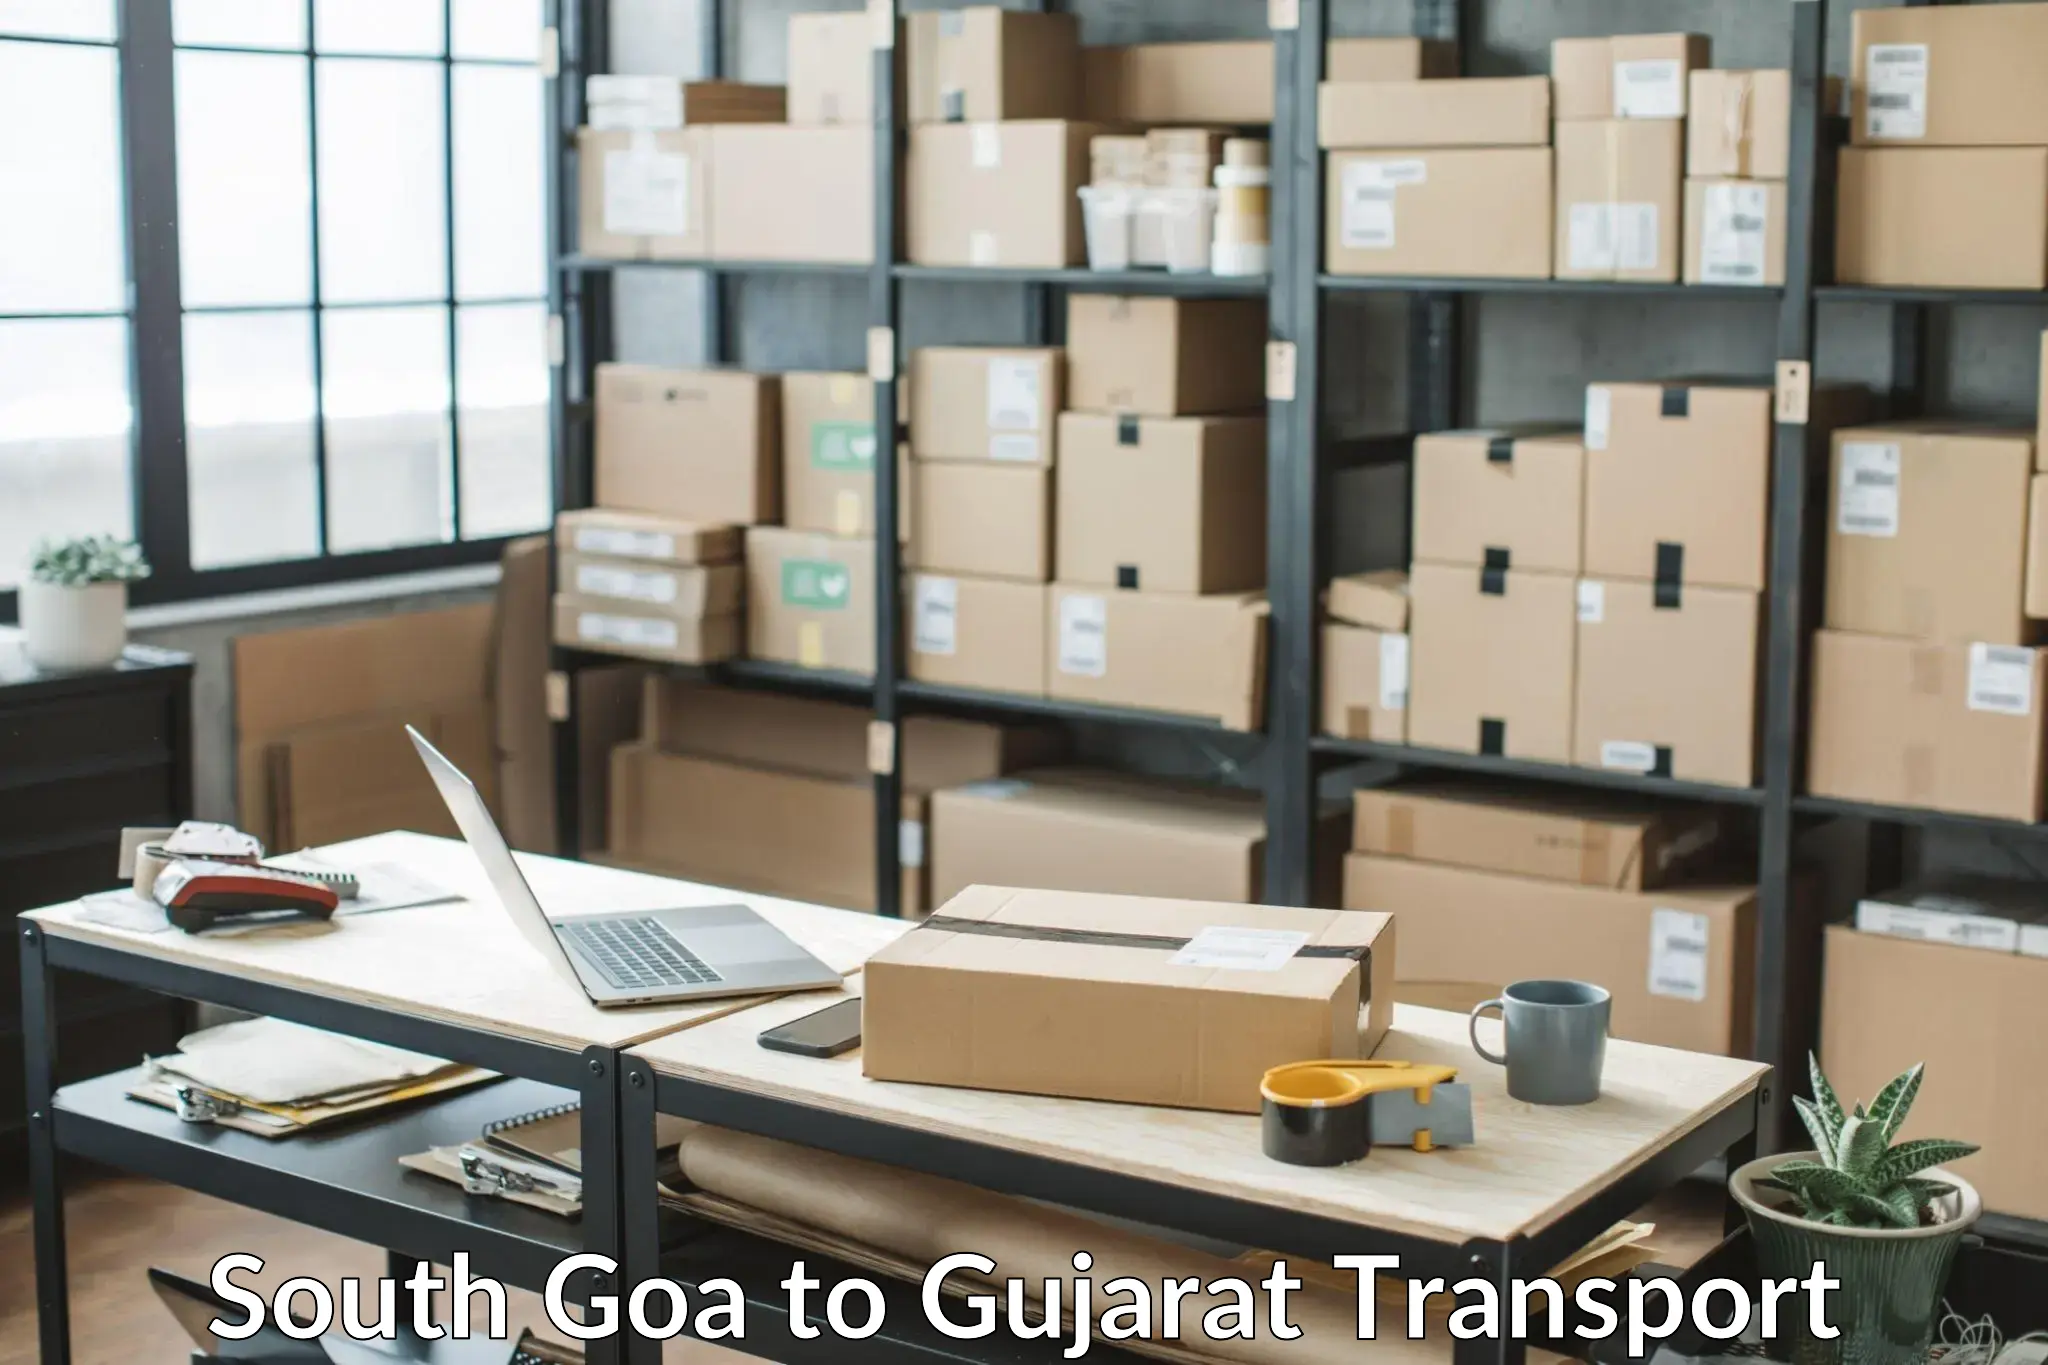 Commercial transport service South Goa to Kutiyana